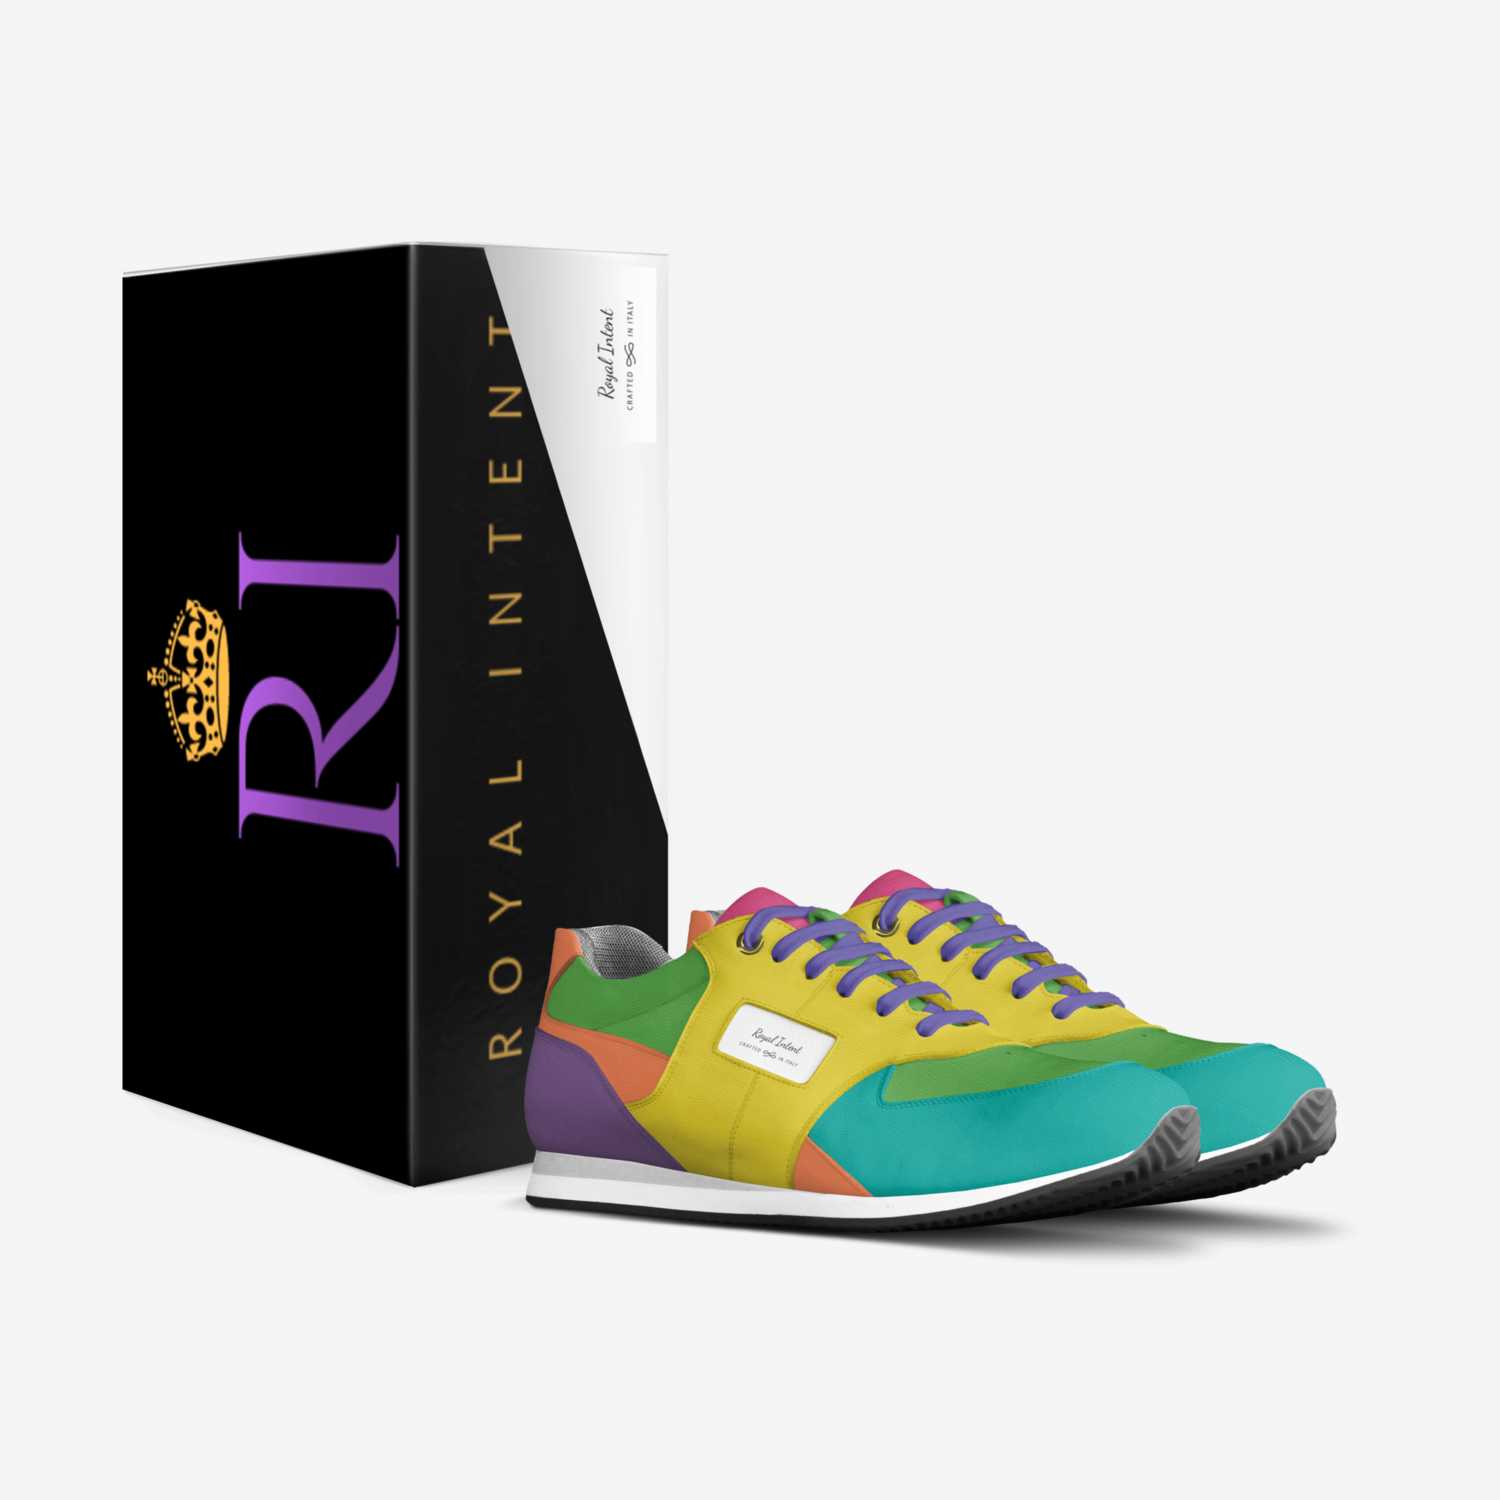 Royal Intent custom made in Italy shoes by Kiauna Griffin | Box view